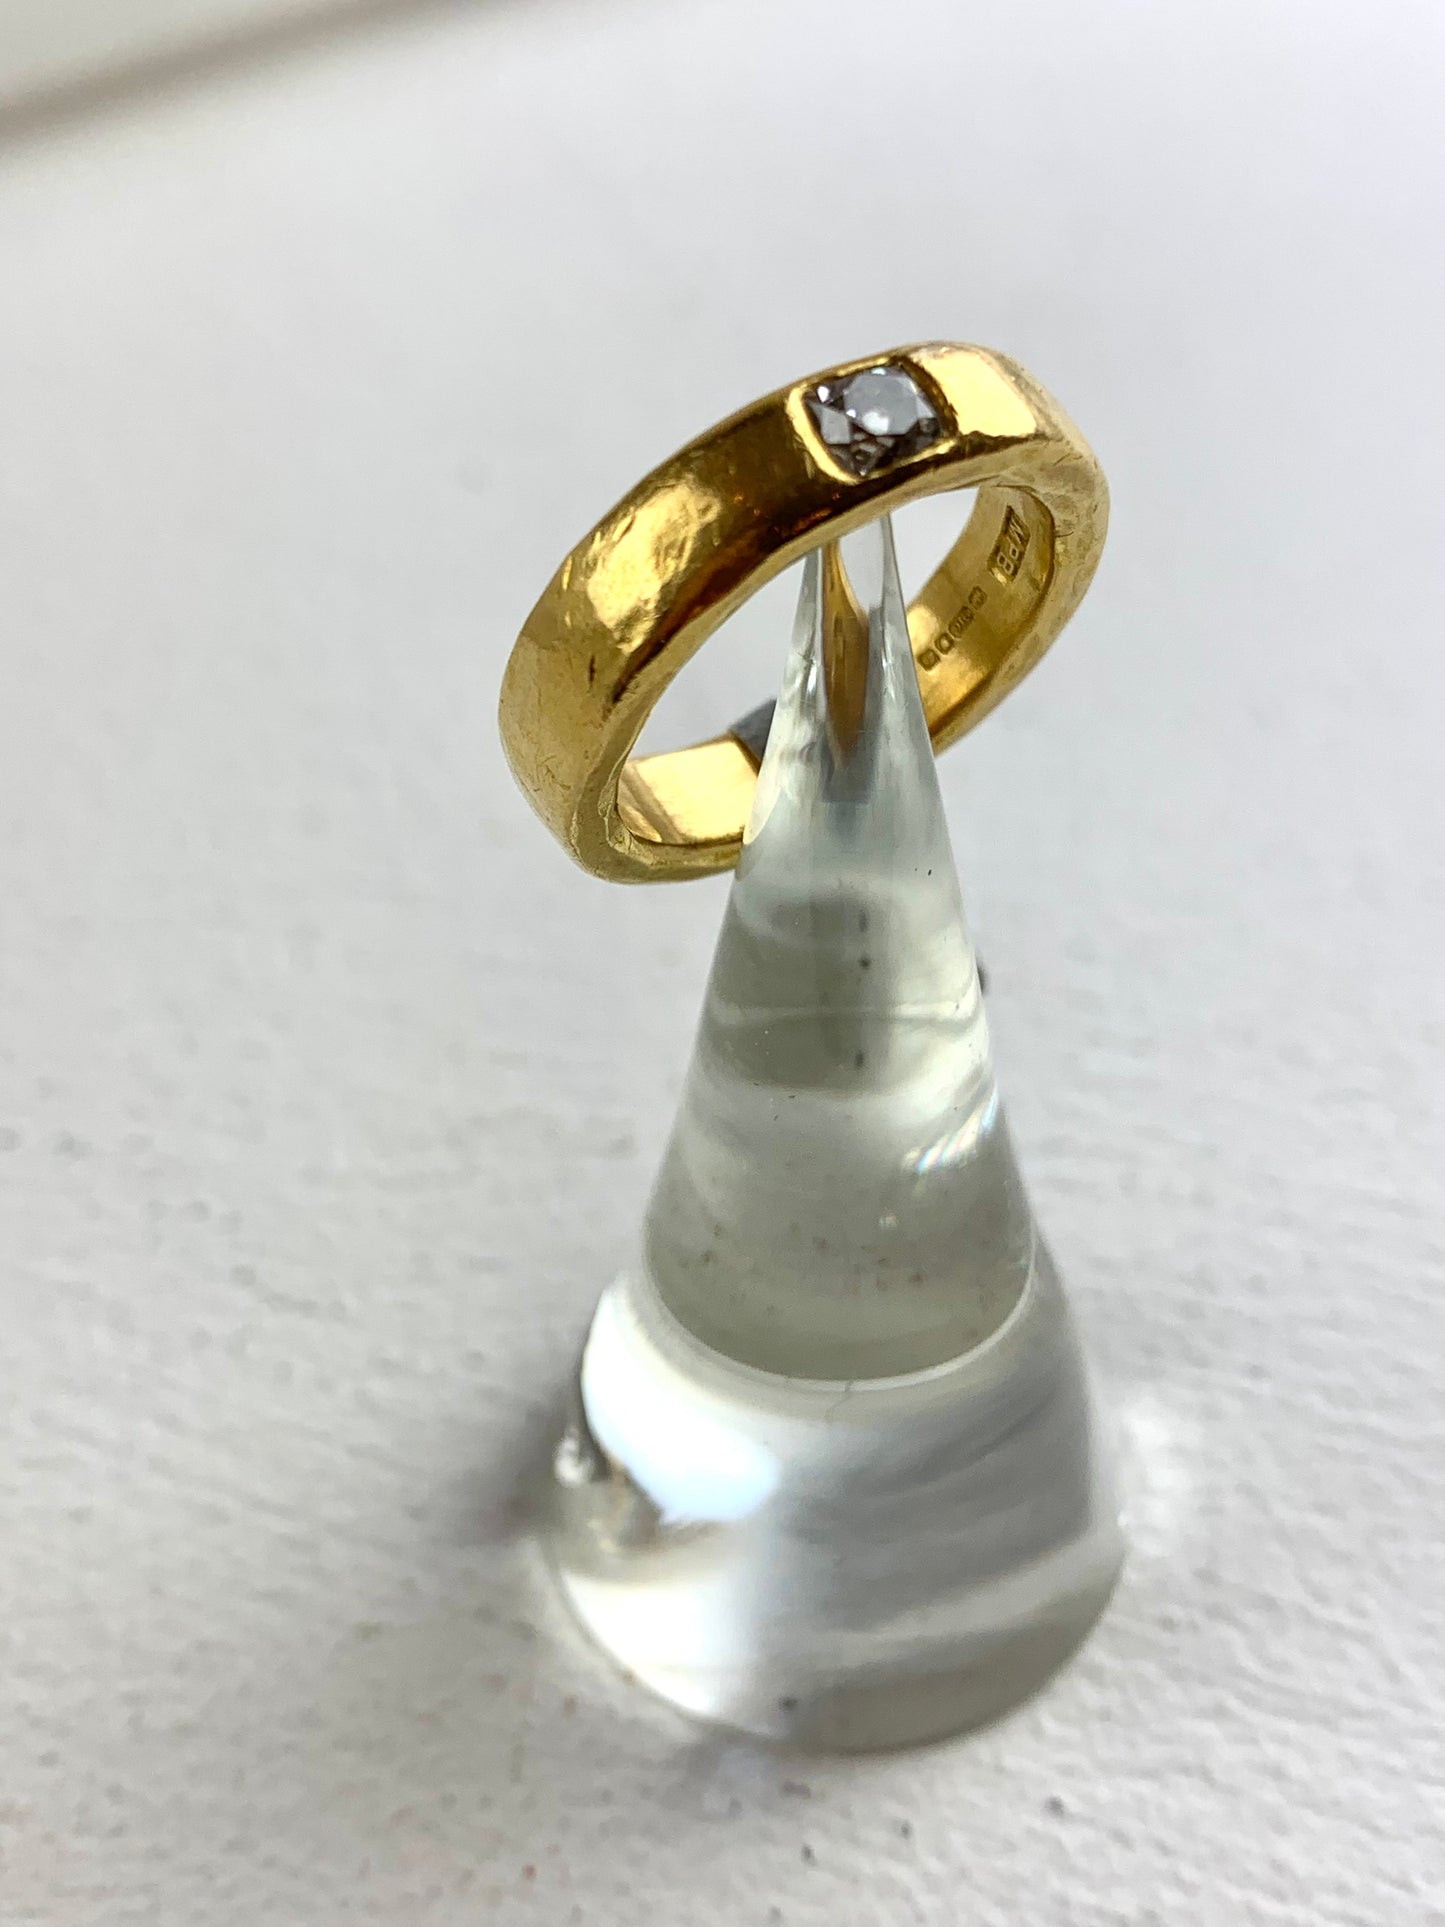 Betts, Malcolm - Gold Ring with Diamond, Size L